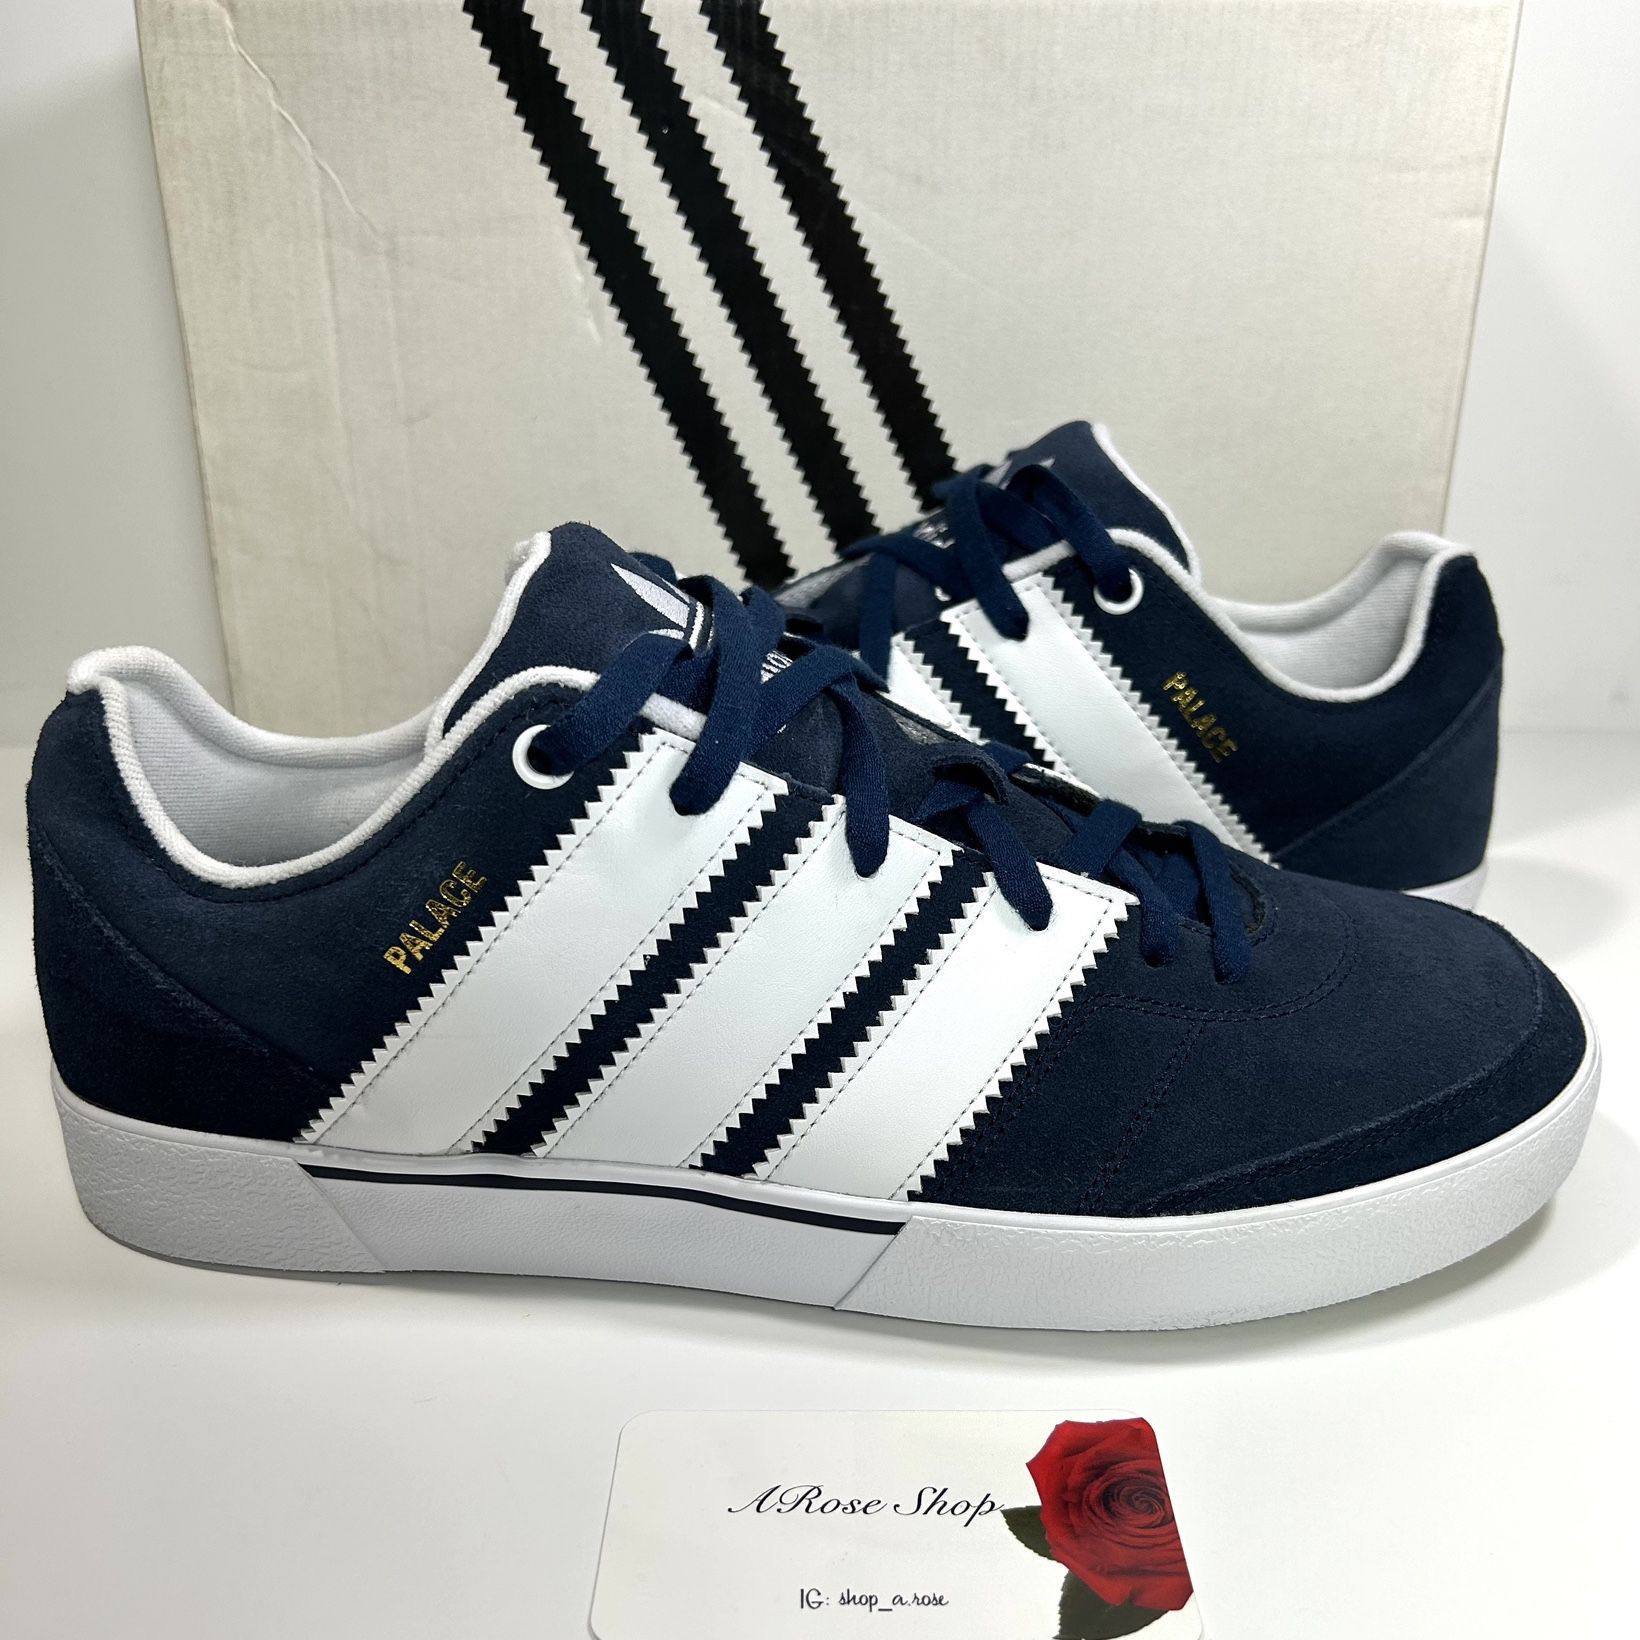 Adidas x Palace 'Navy' Shoes Size: 11.5 M for Sale in San Jose, CA - OfferUp